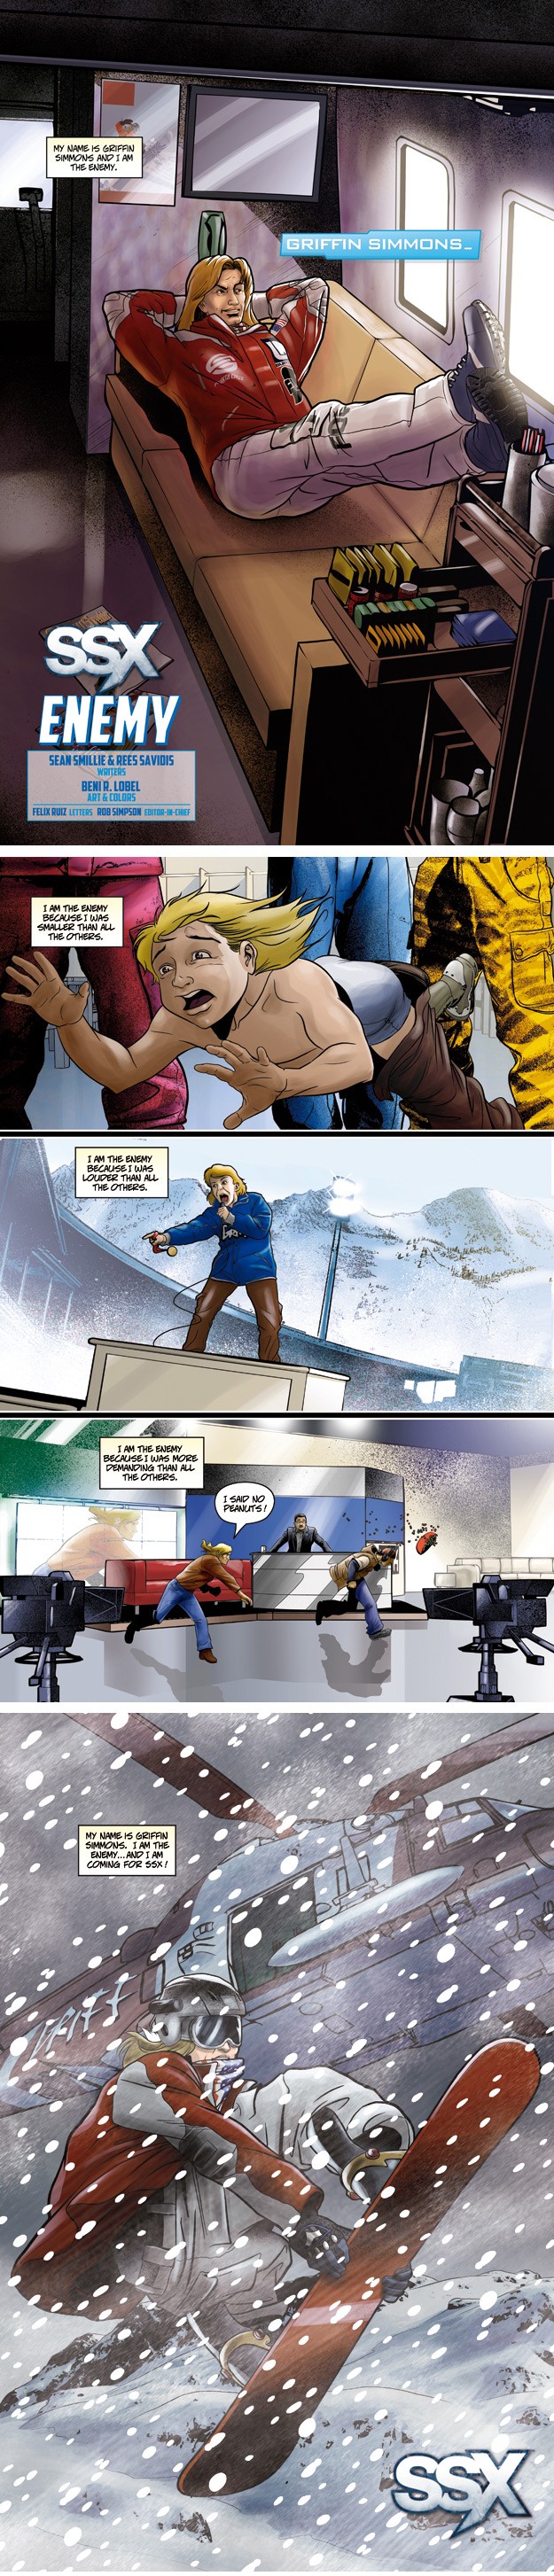 SSX-Reboot_Comic-Griff